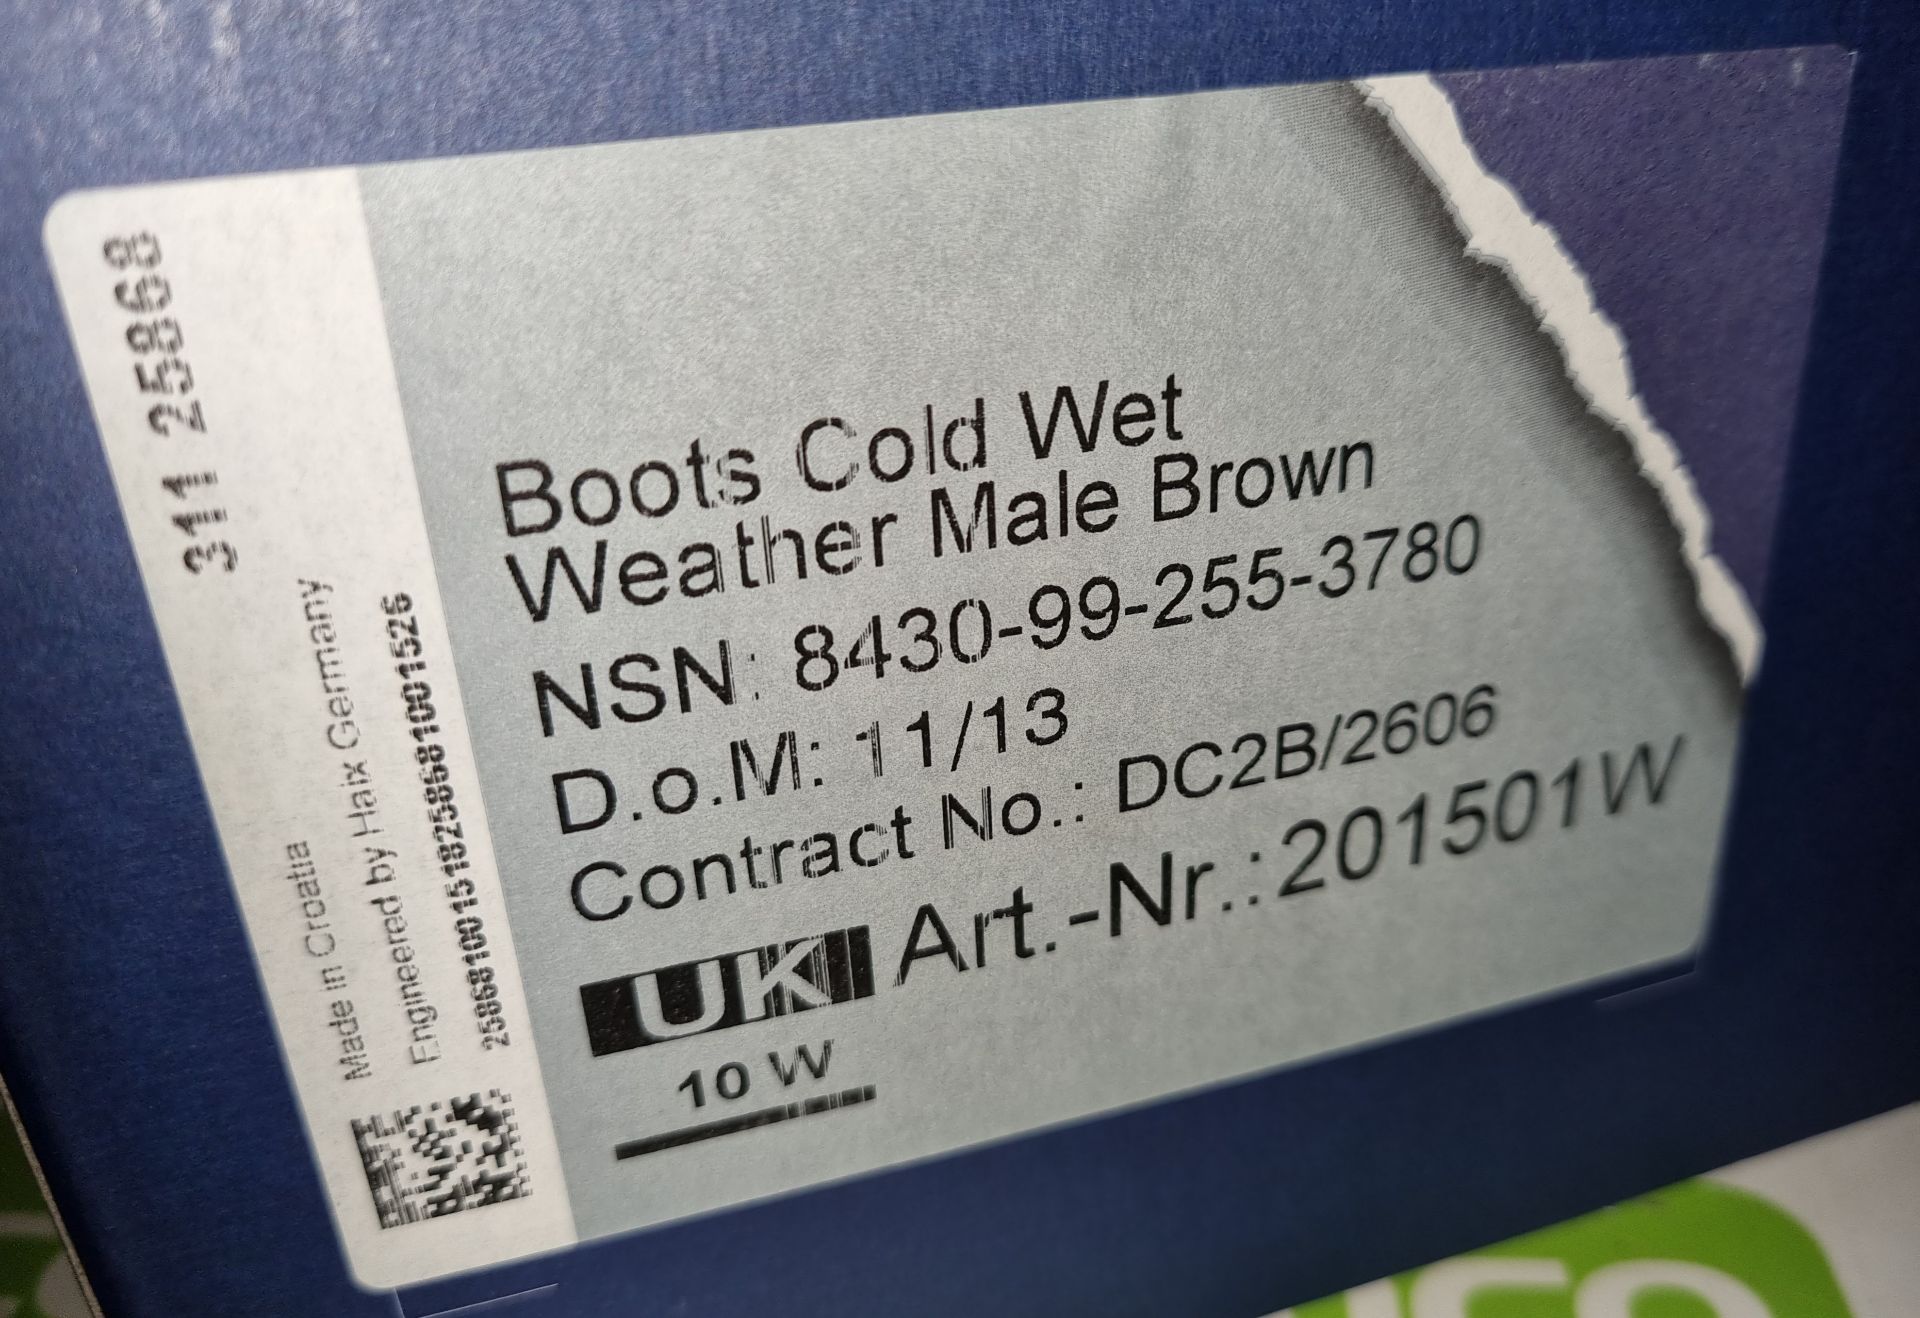 5x pairs of Haix cold wet weather boots - Size 10W - Image 3 of 4